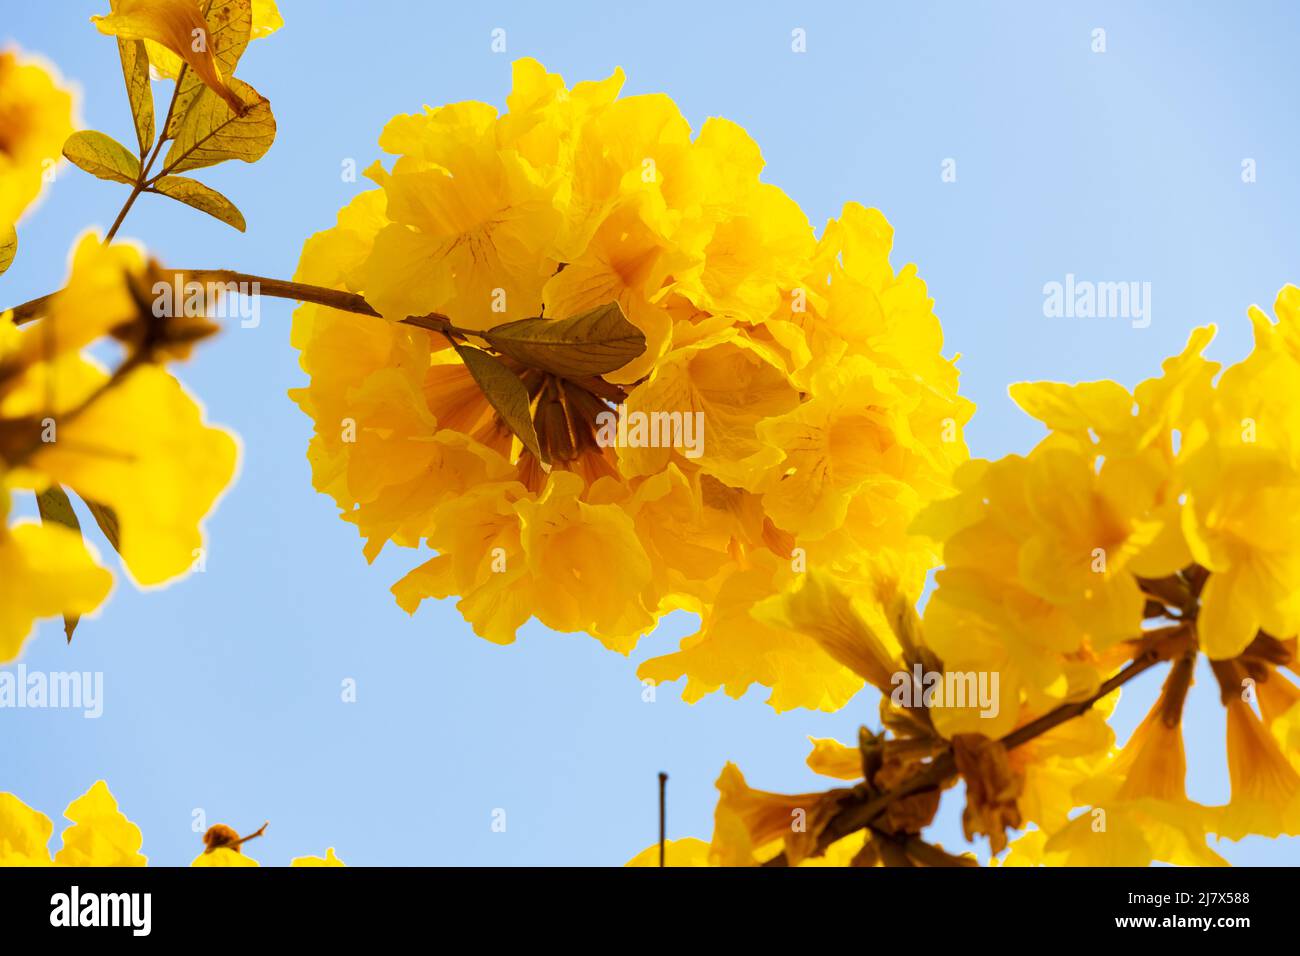 blooming Guayacan or Handroanthus chrysanthus or Golden Bell Tree horizontal composition Stock Photo